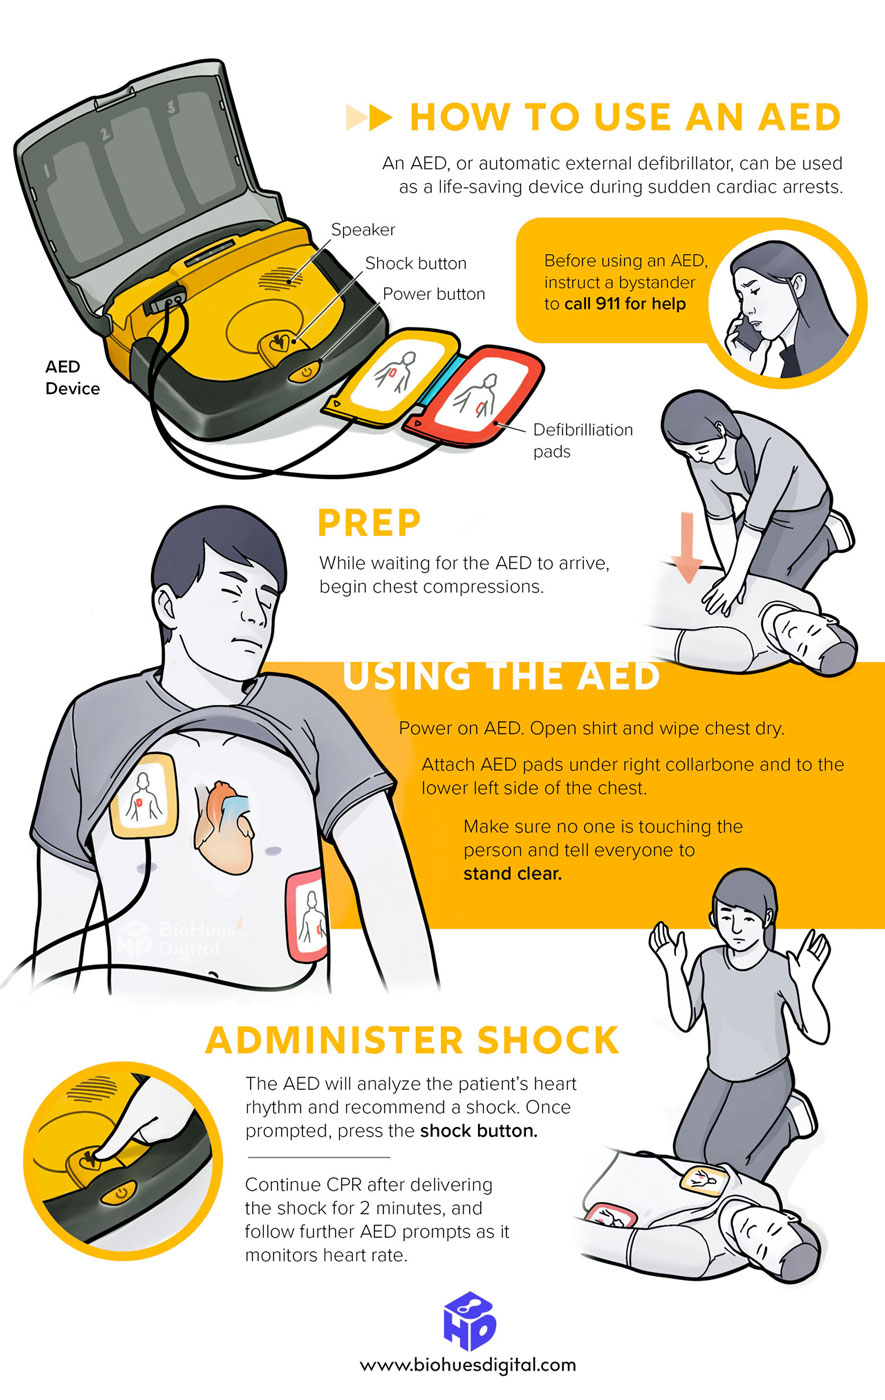 How to use AED educational poster infographic